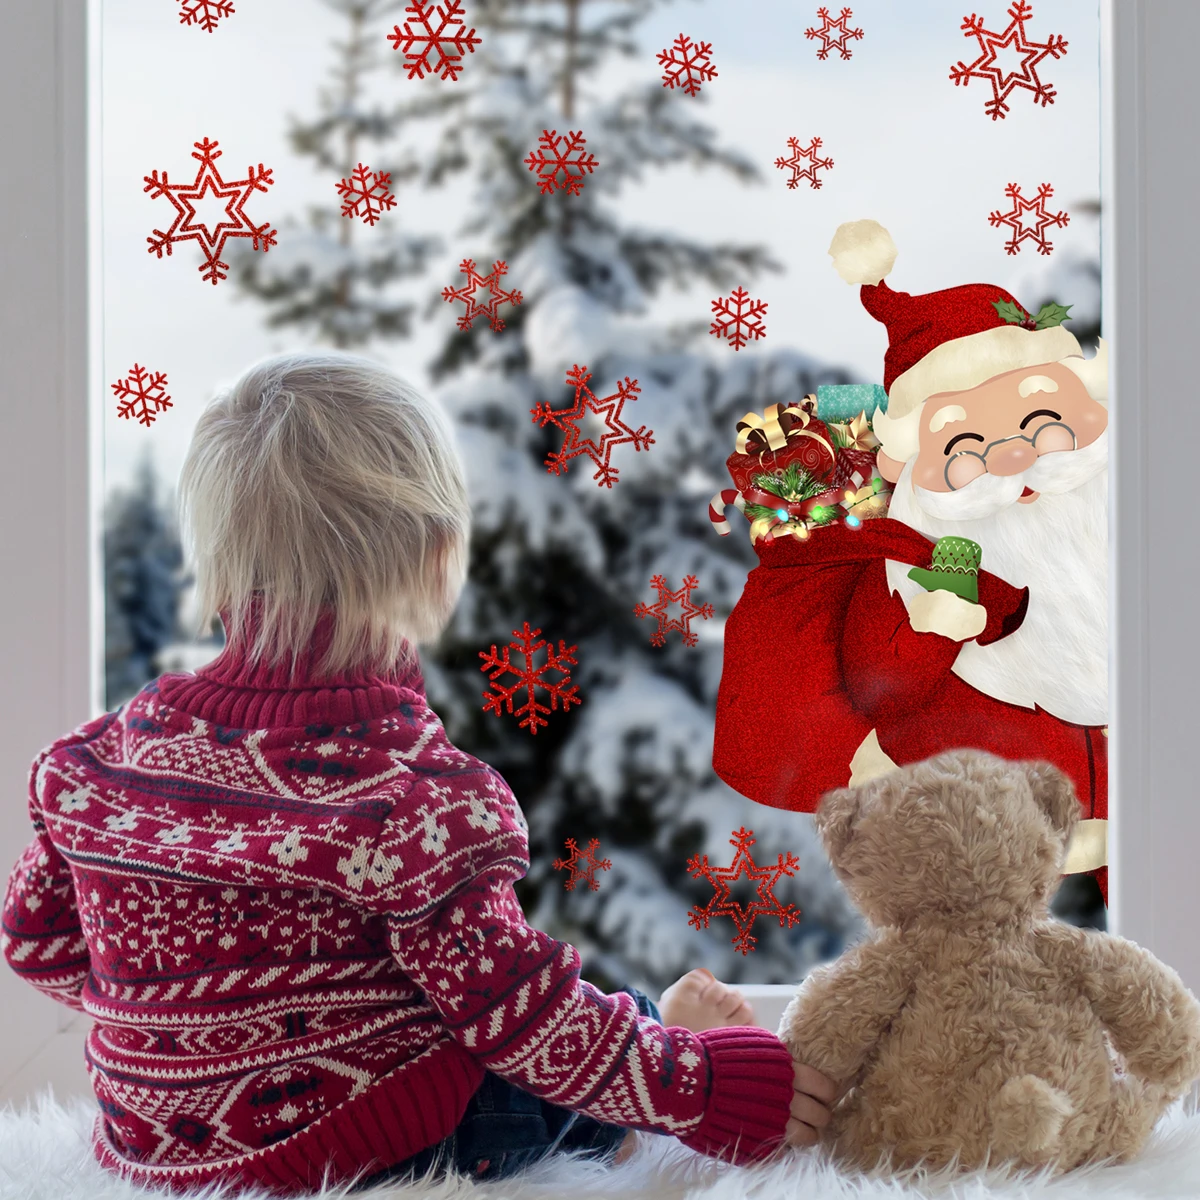 

Snowflake Santa Claus Wallpaper Static Paste Window Window Double-sided Visual Decorative Wall Decal